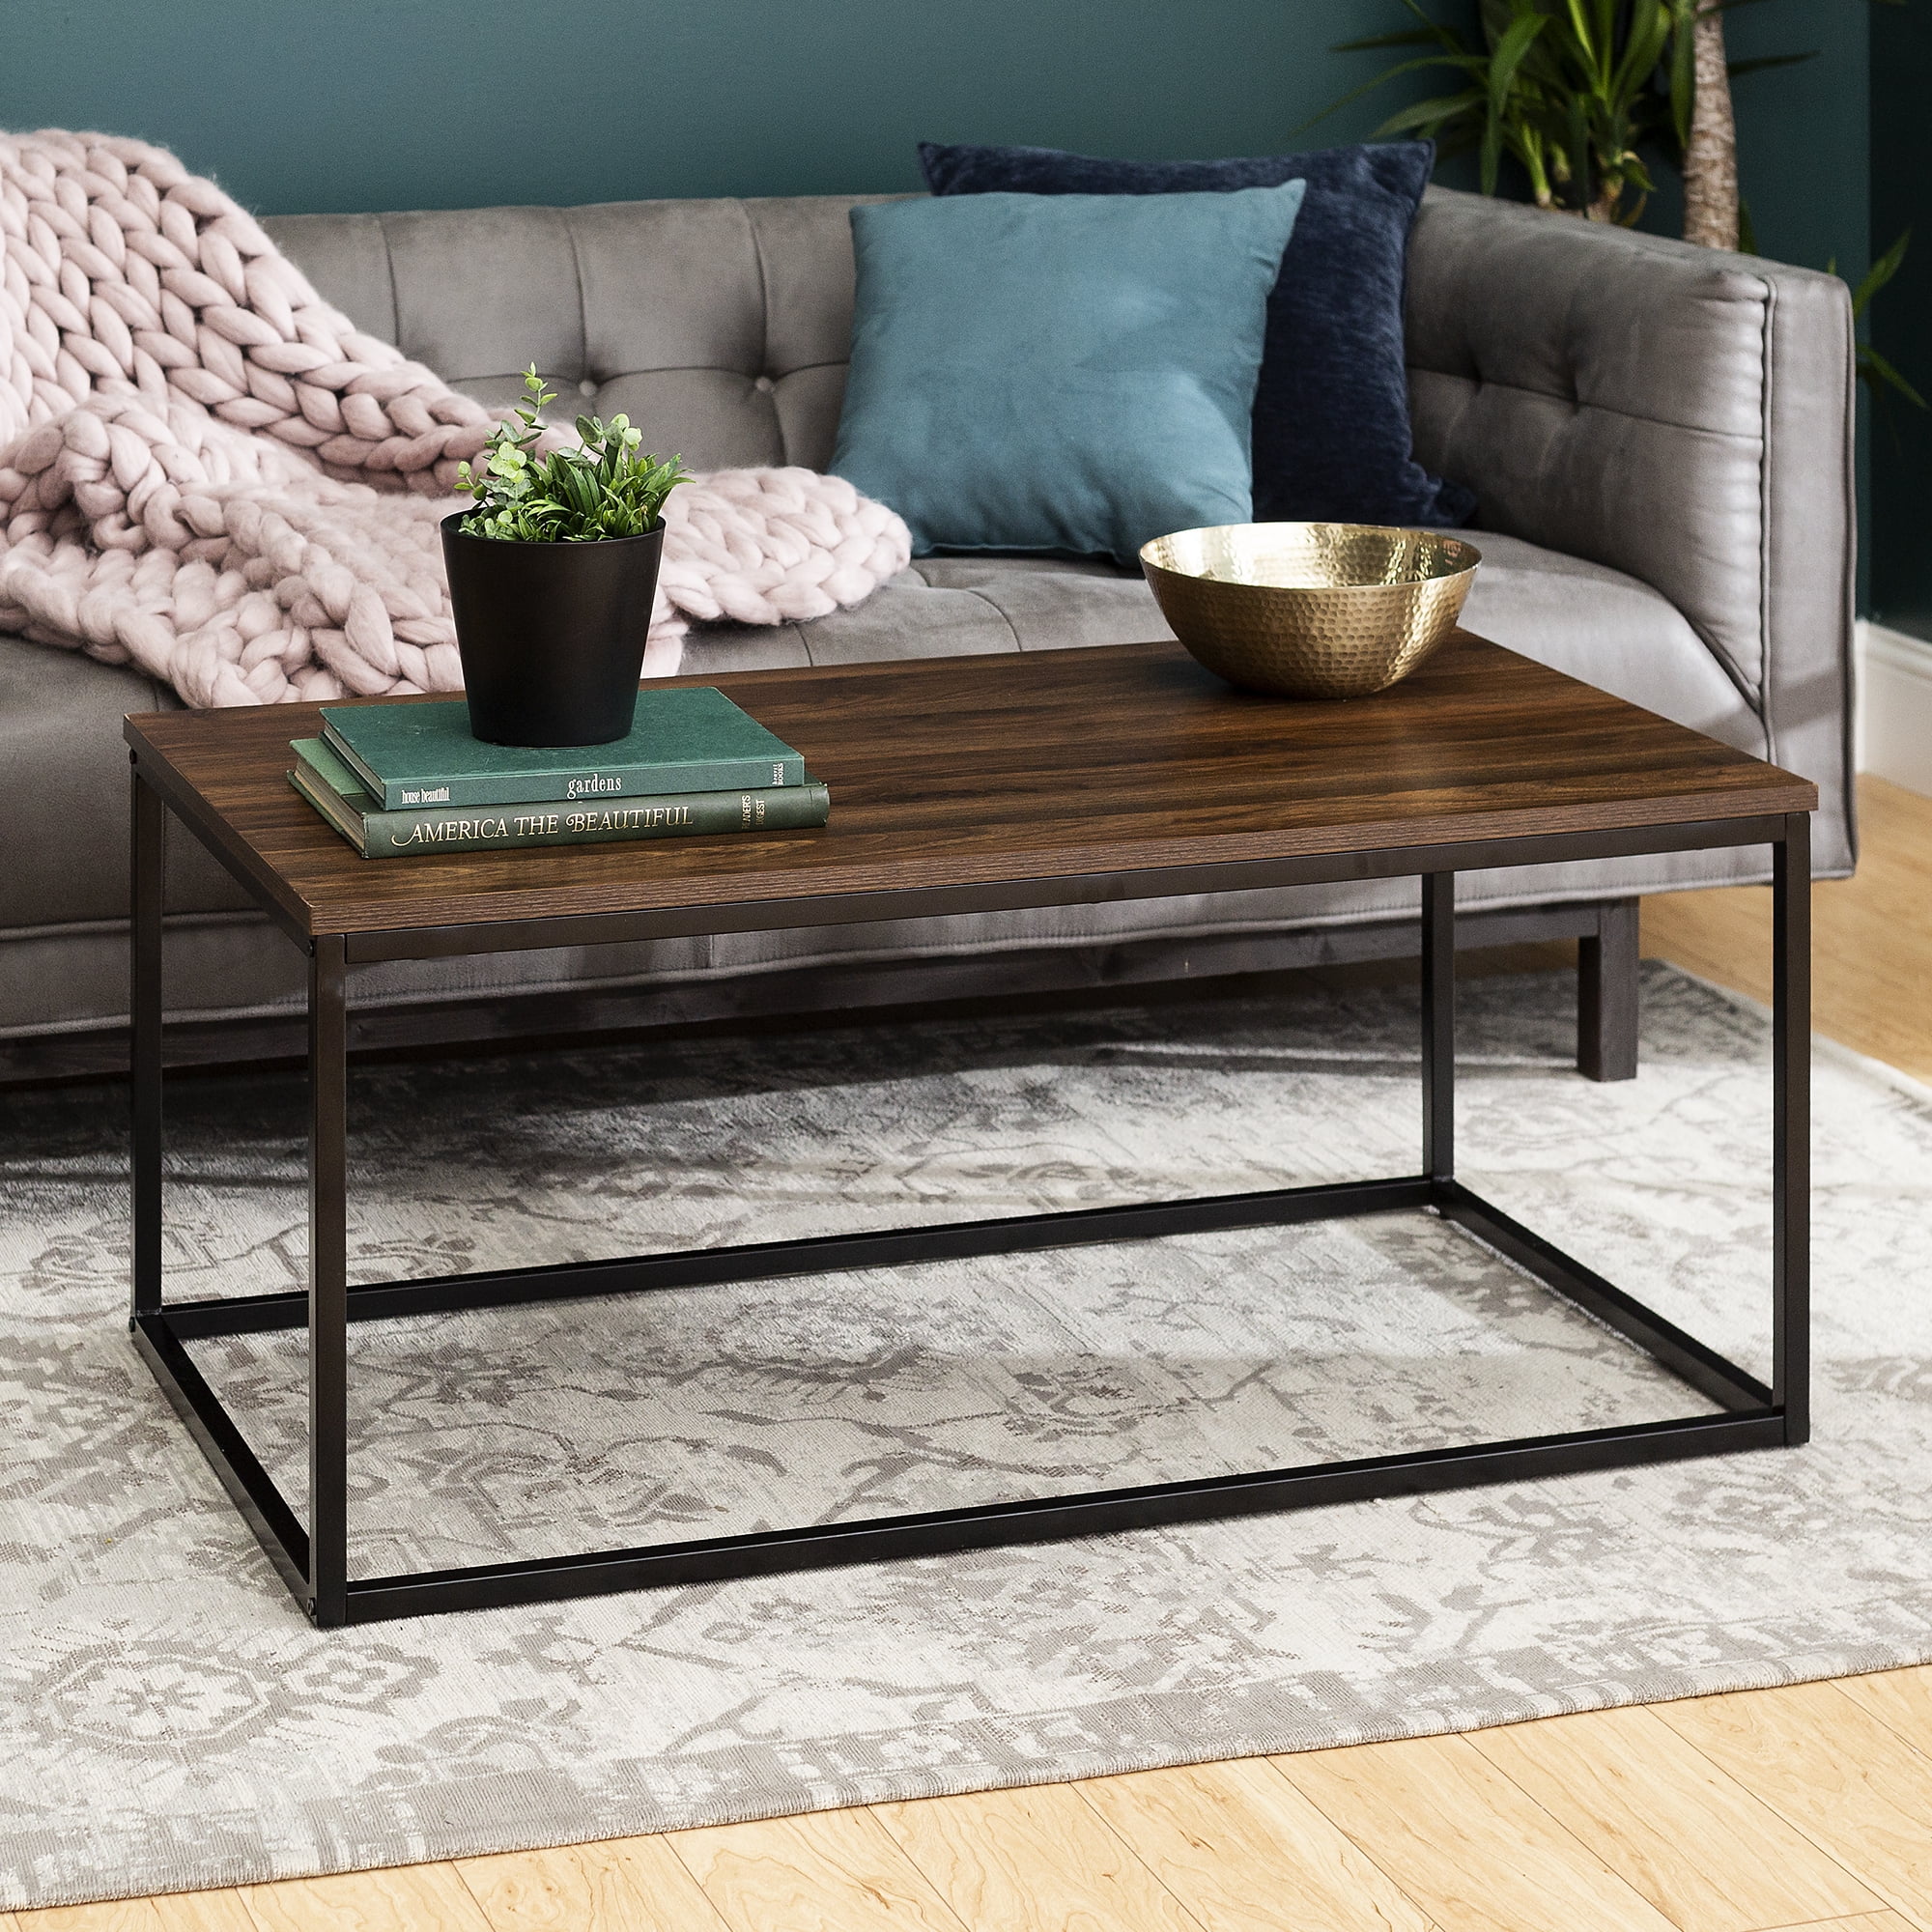 Minimalist Fabric Coffee Table for Small Space